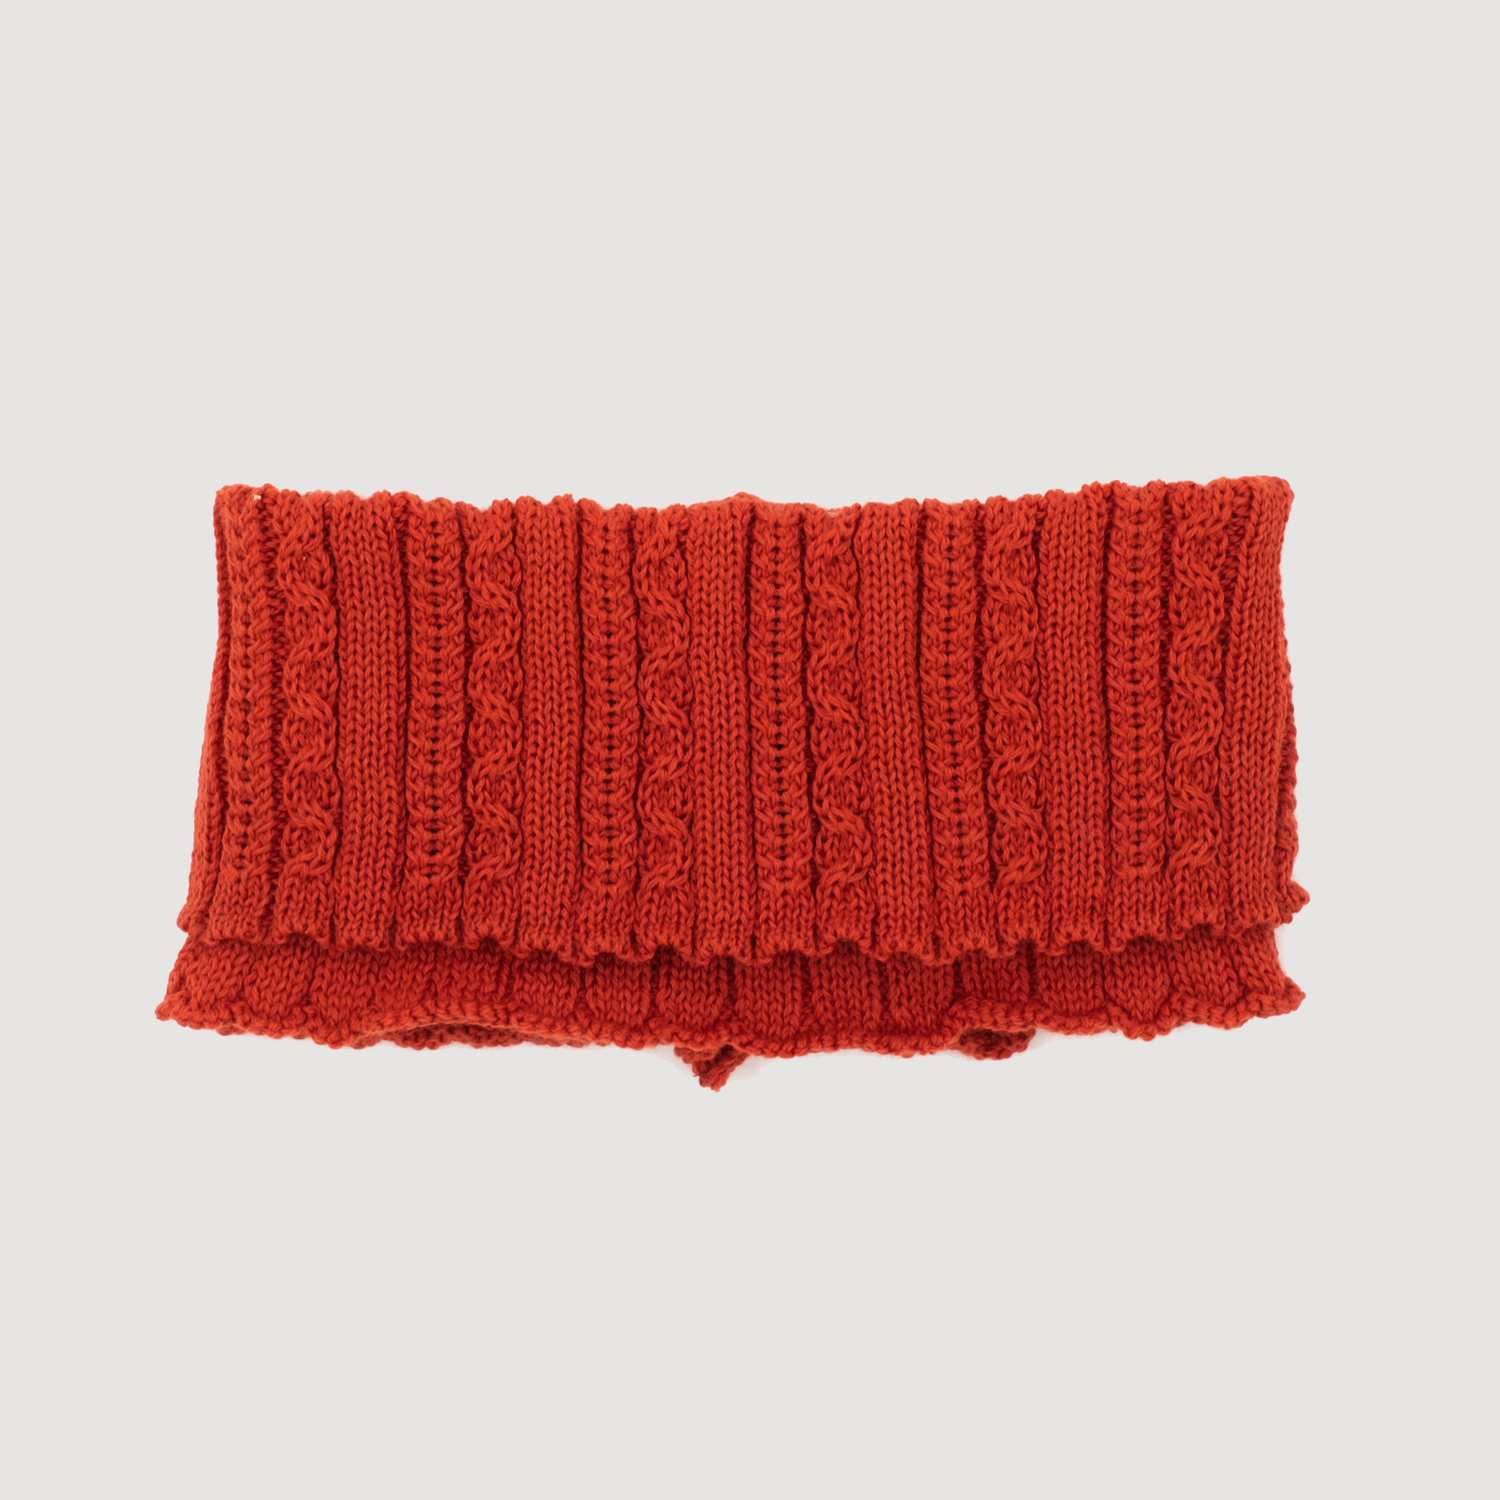 Mielo Collar, Red - Children's